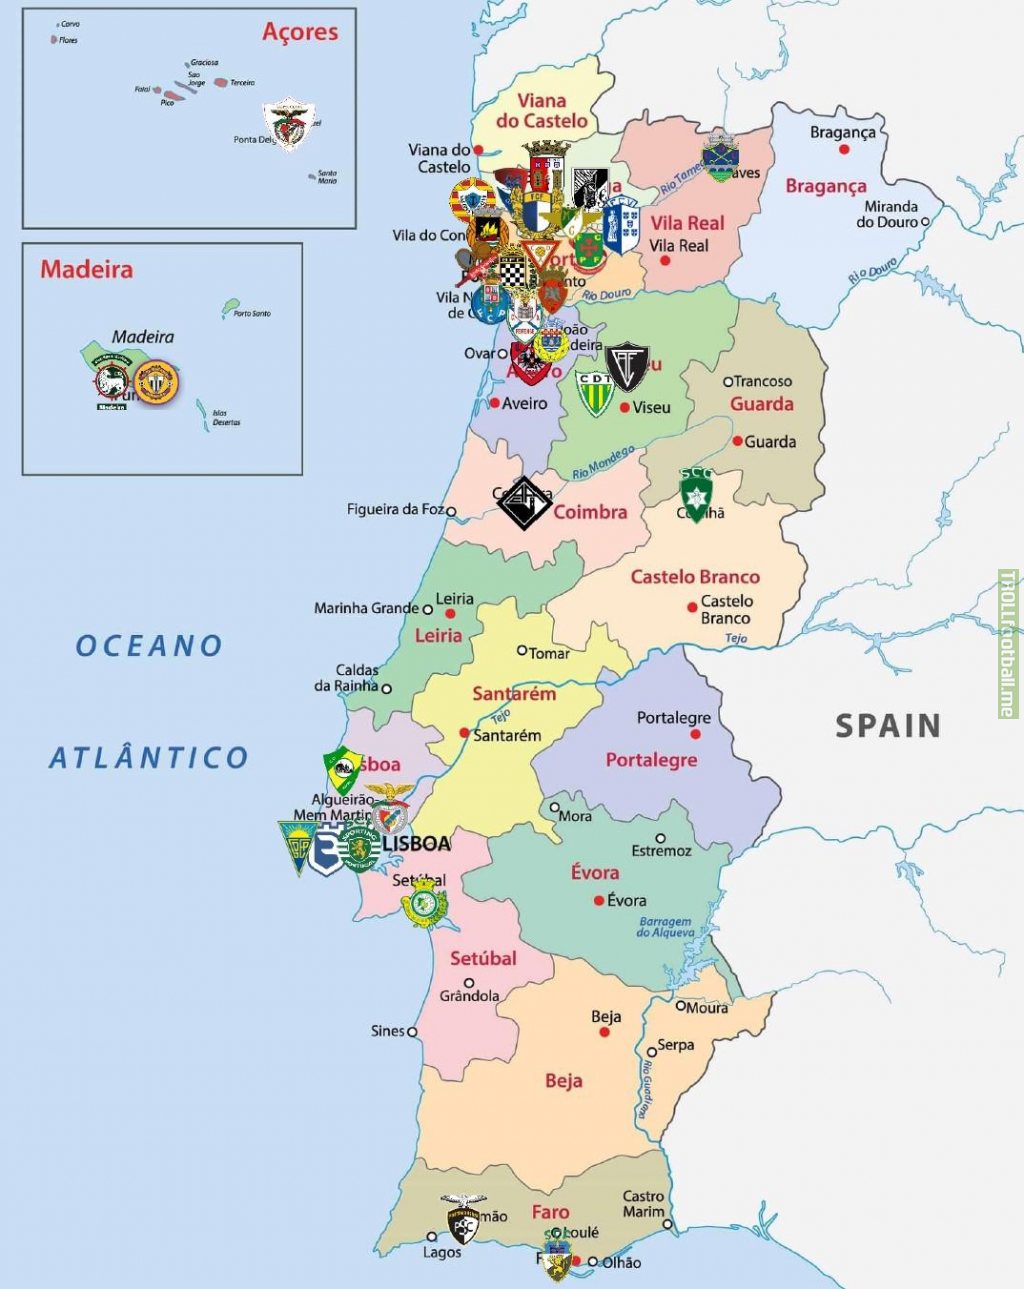 Map of Portuguese clubs for 1st and 2nd tier in 2020/2021